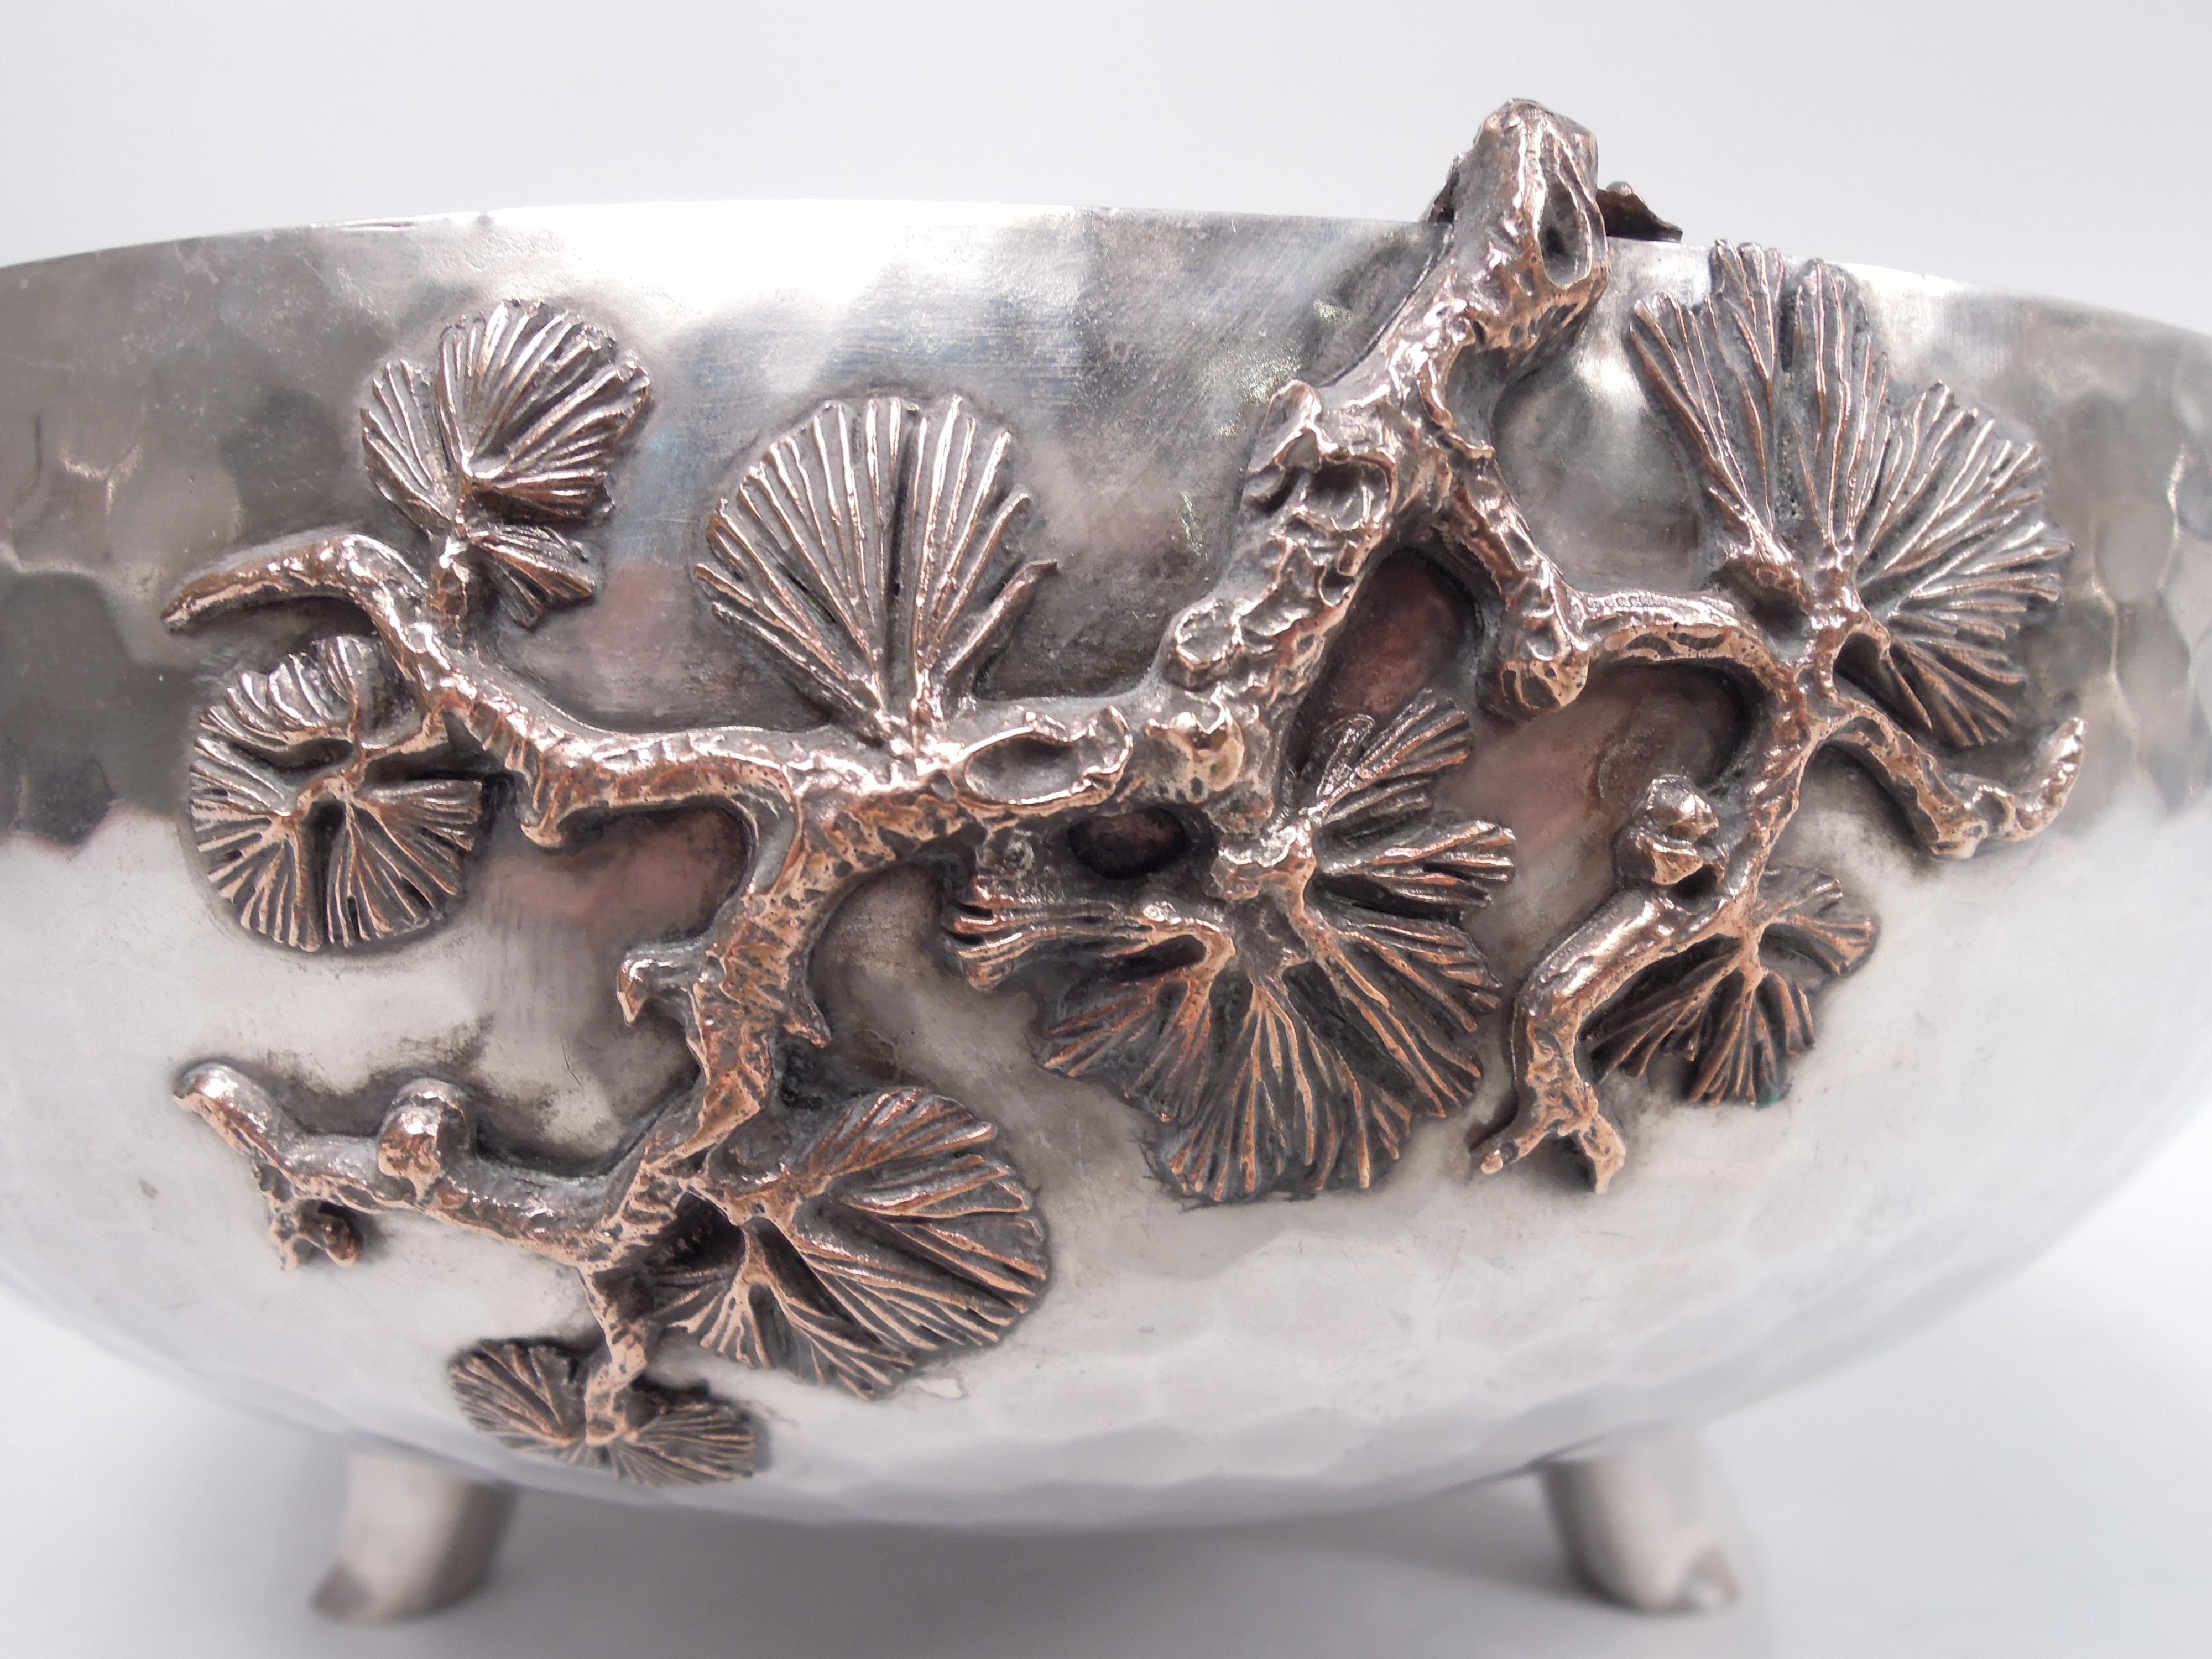 Gorham Japonesque Hand-Hammered Mixed Metal Dragonfly Bowl, 1883 For Sale 3